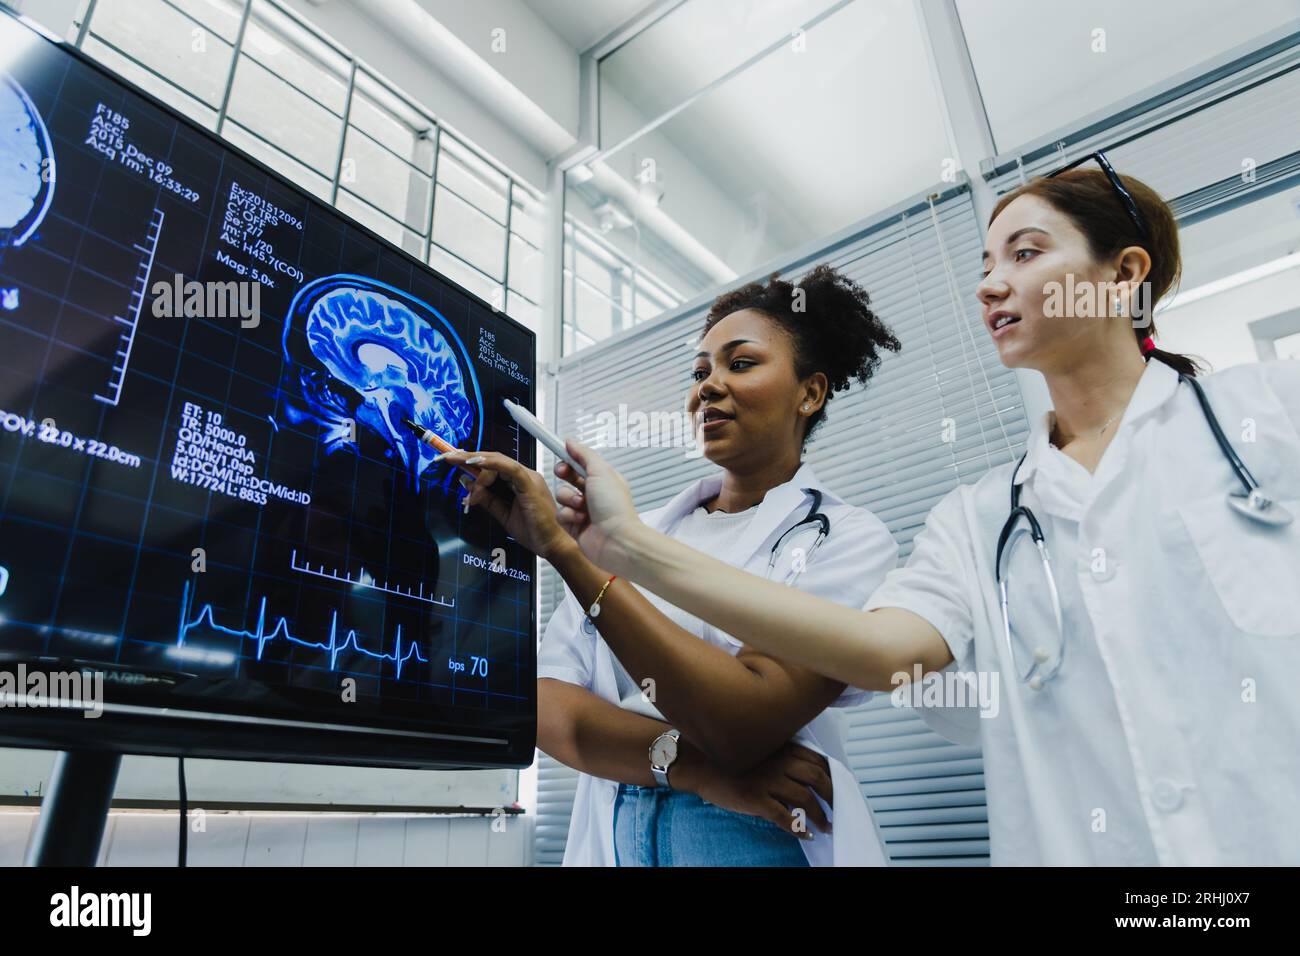 Team of female doctor check on scan results paper and looking at monitors in laboratory, share medical knowledge and experience benefits her coworkers Stock Photo